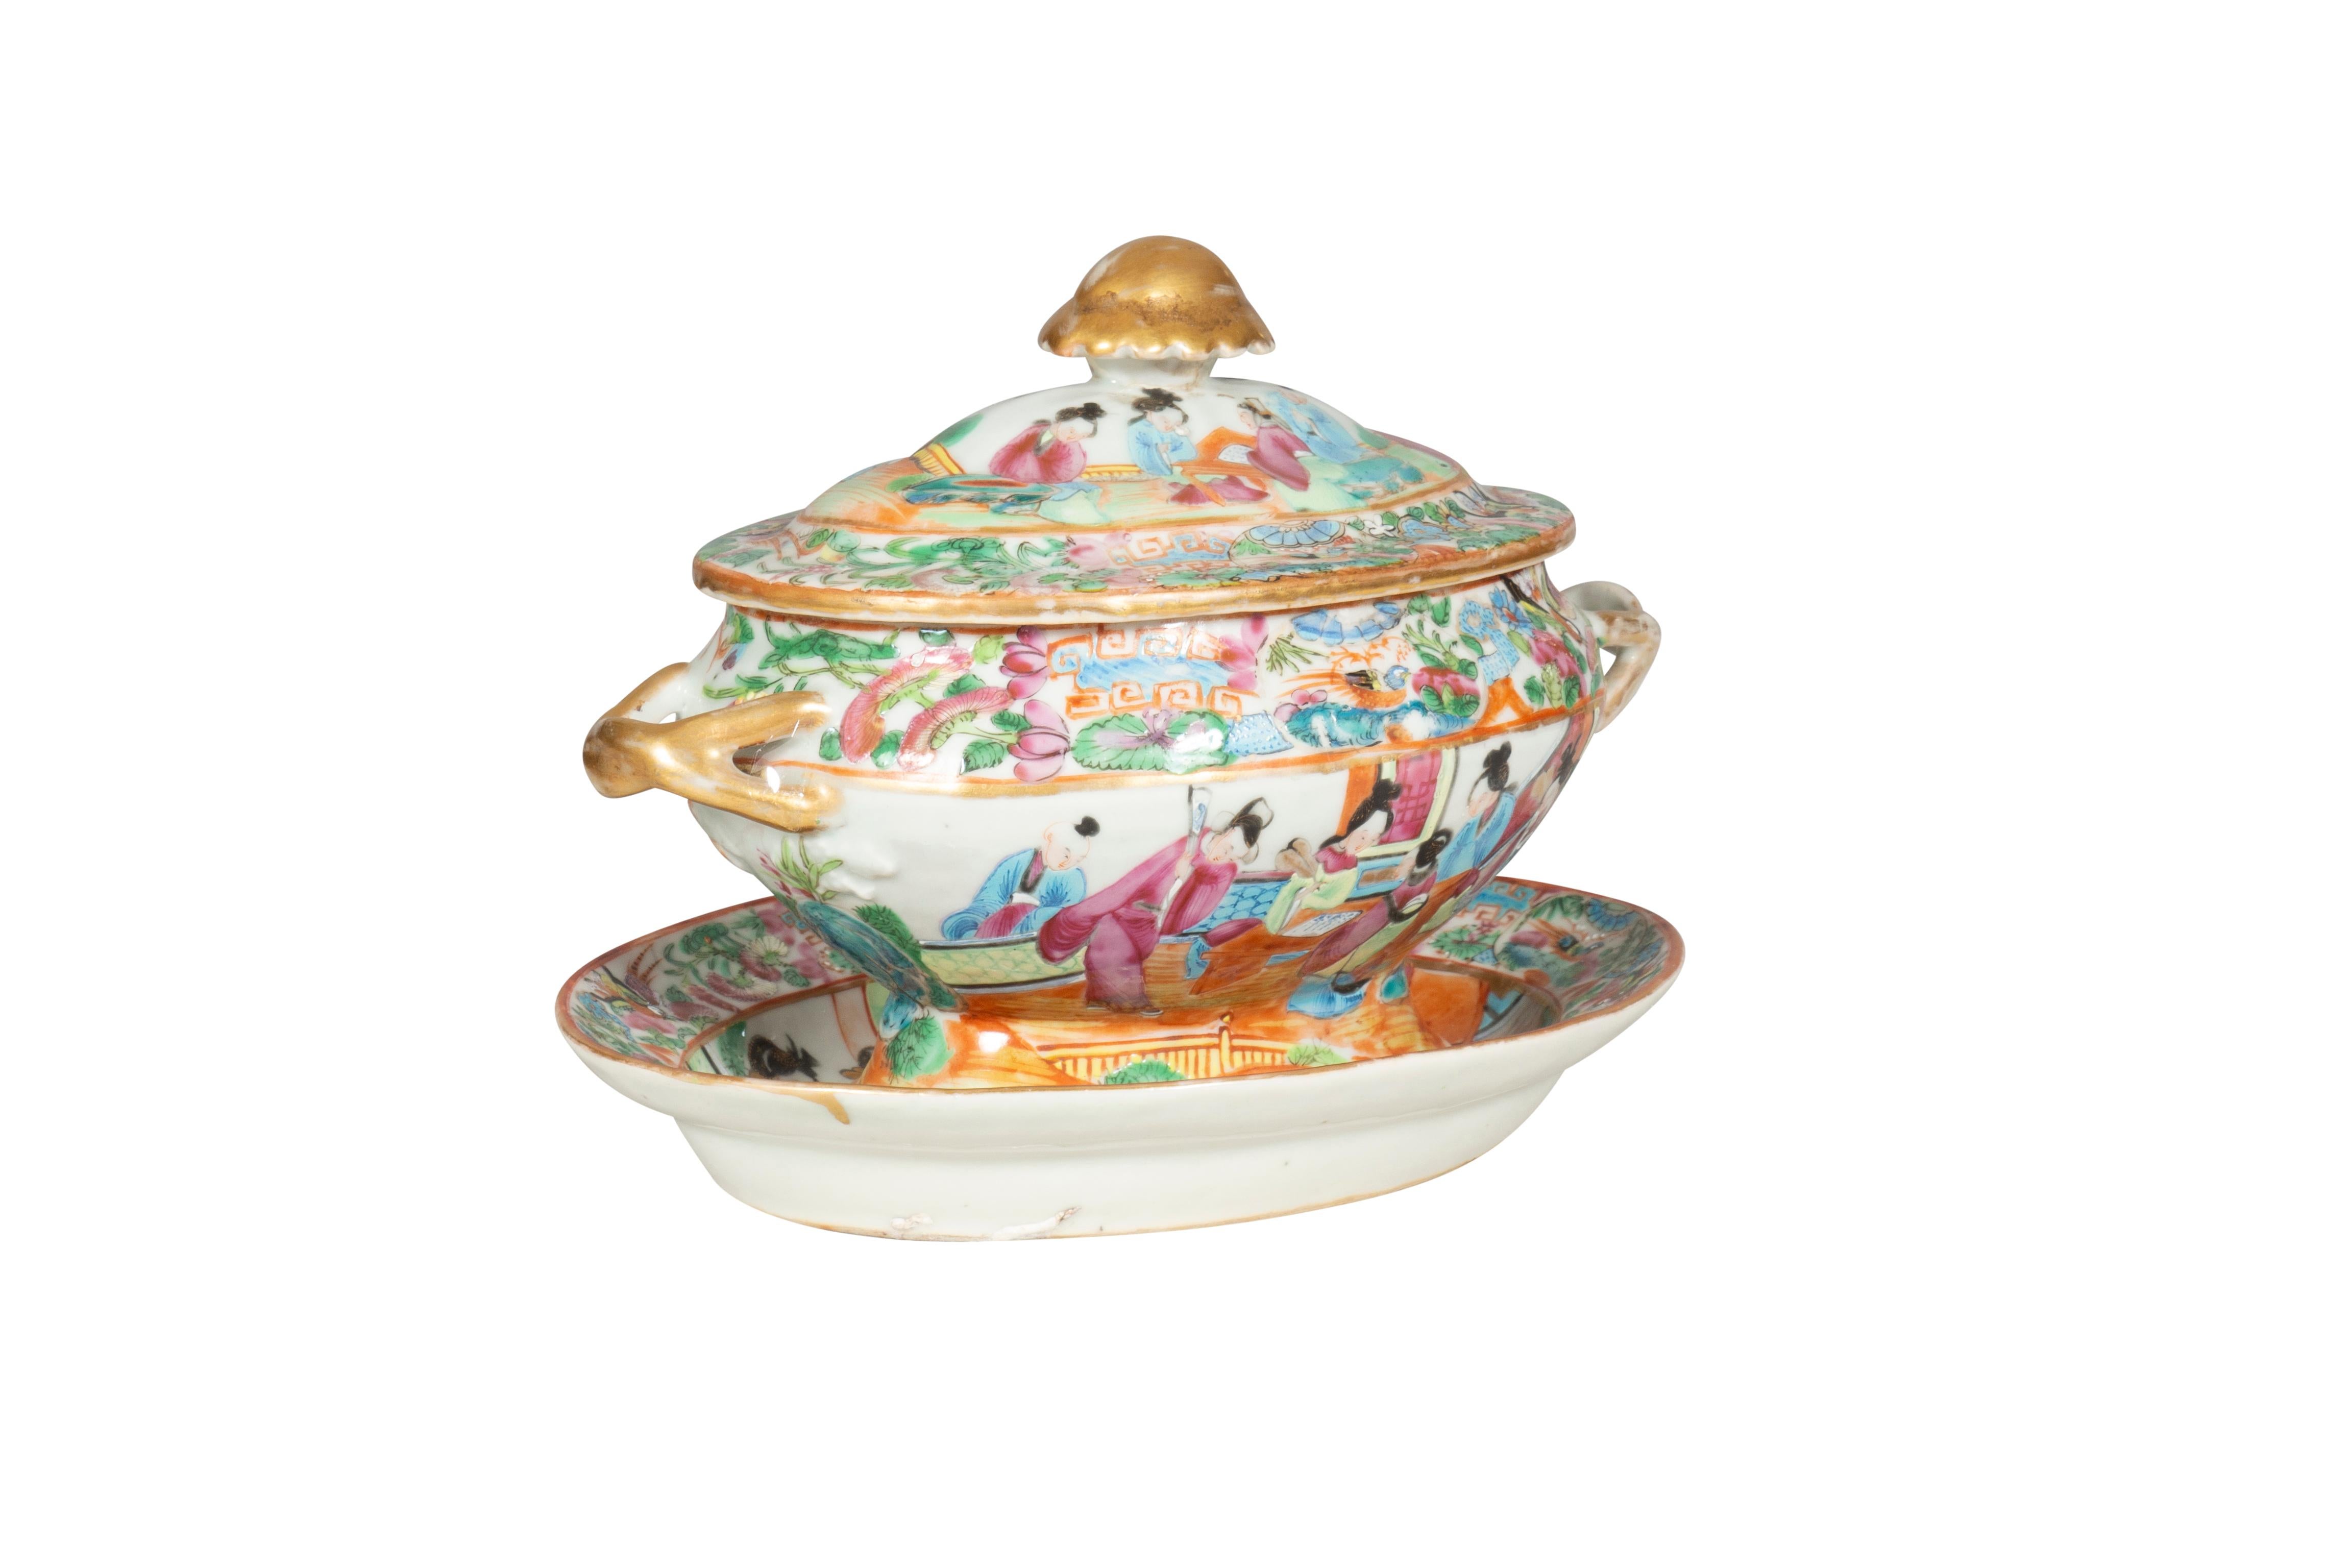 Well painted with oval cover with finial over conforming body with handles and conforming tray.